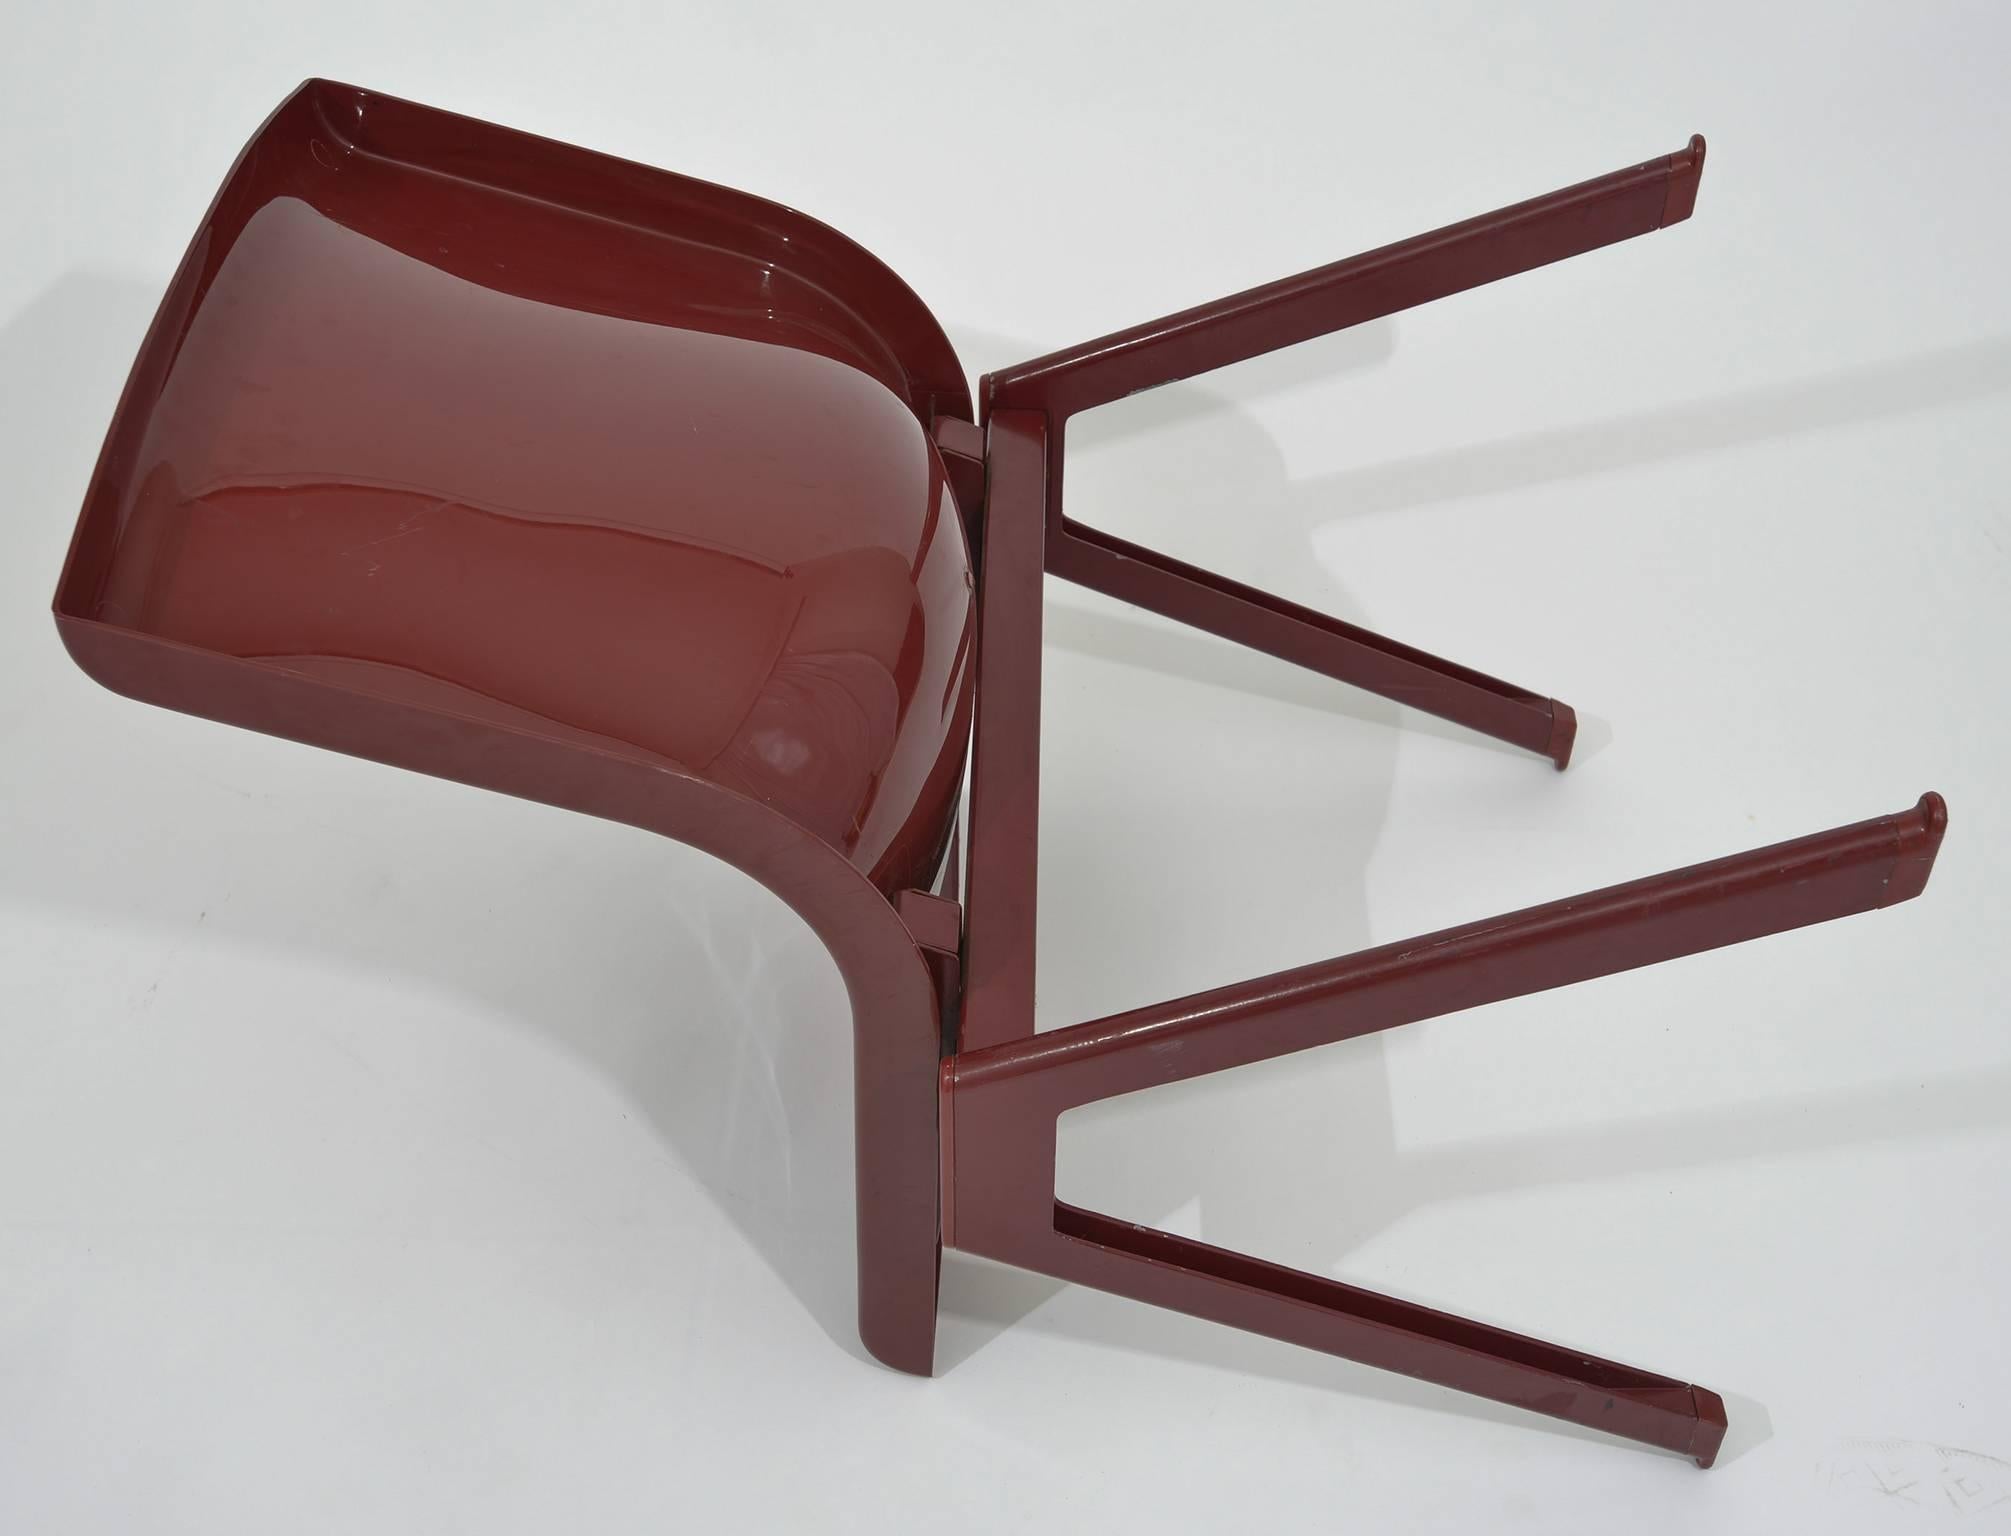 Synthesis Chairs by Ettore Sottsass's Design for Olivetti In Good Condition For Sale In Alessandria, Piemonte